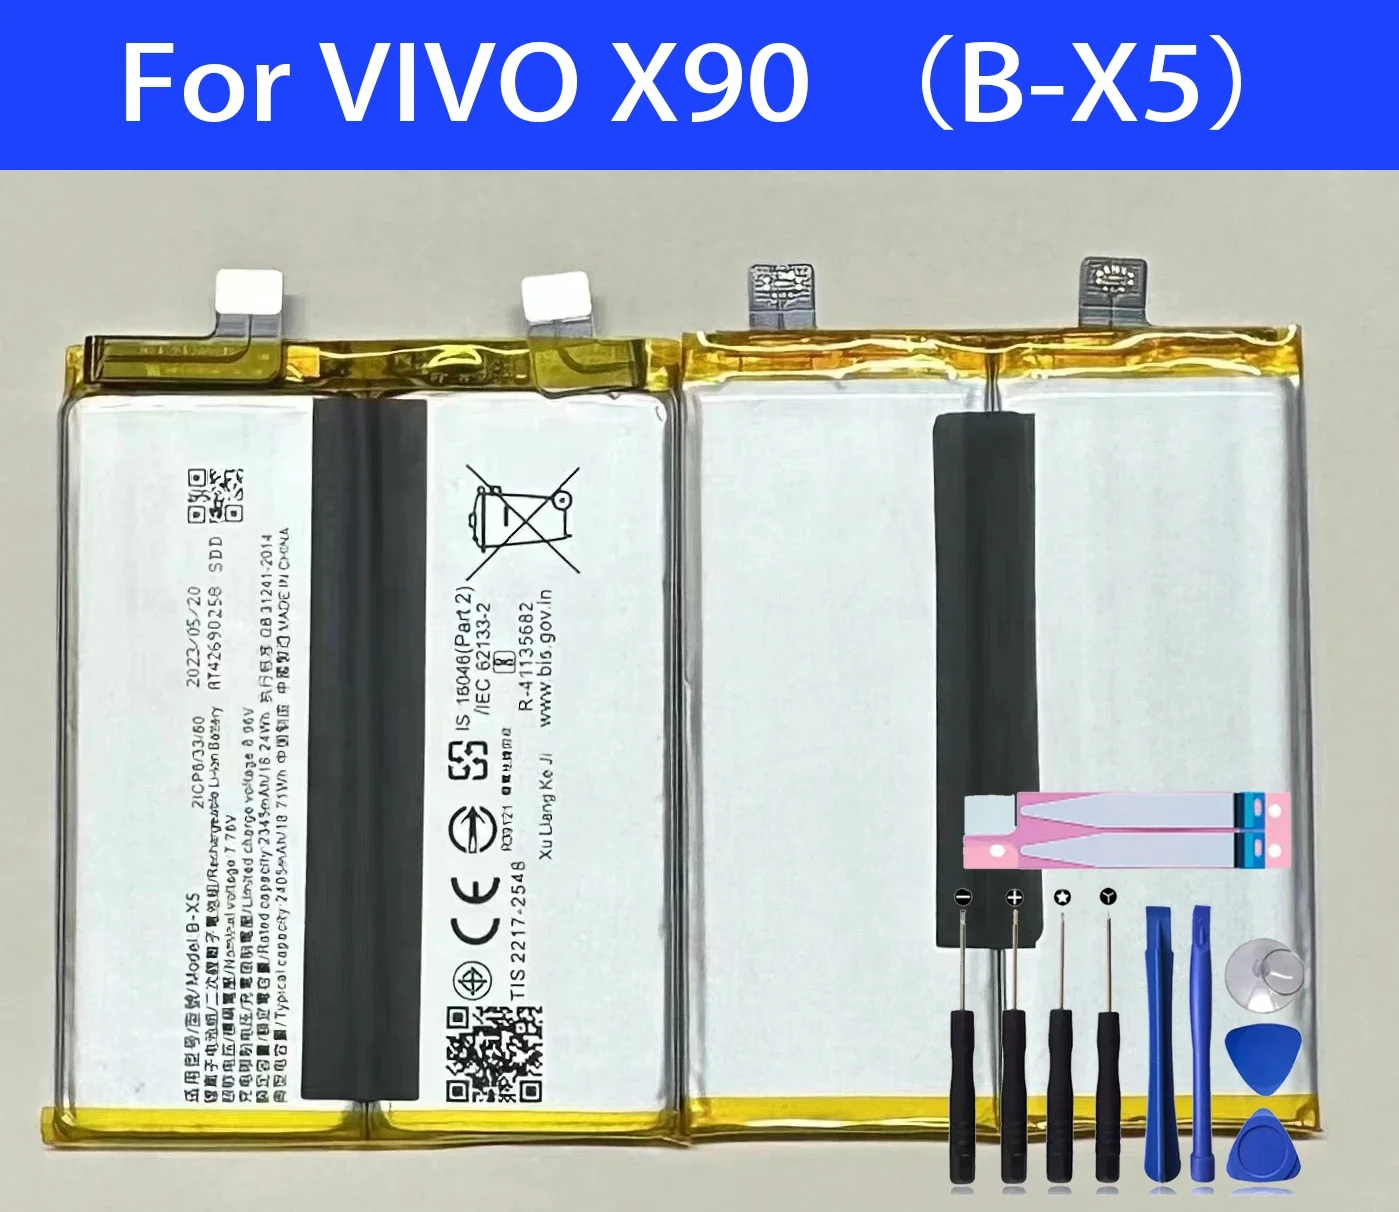 

100% New Original Replacement Battery B-X5 For VIVO X90 Phone Battery+Tools